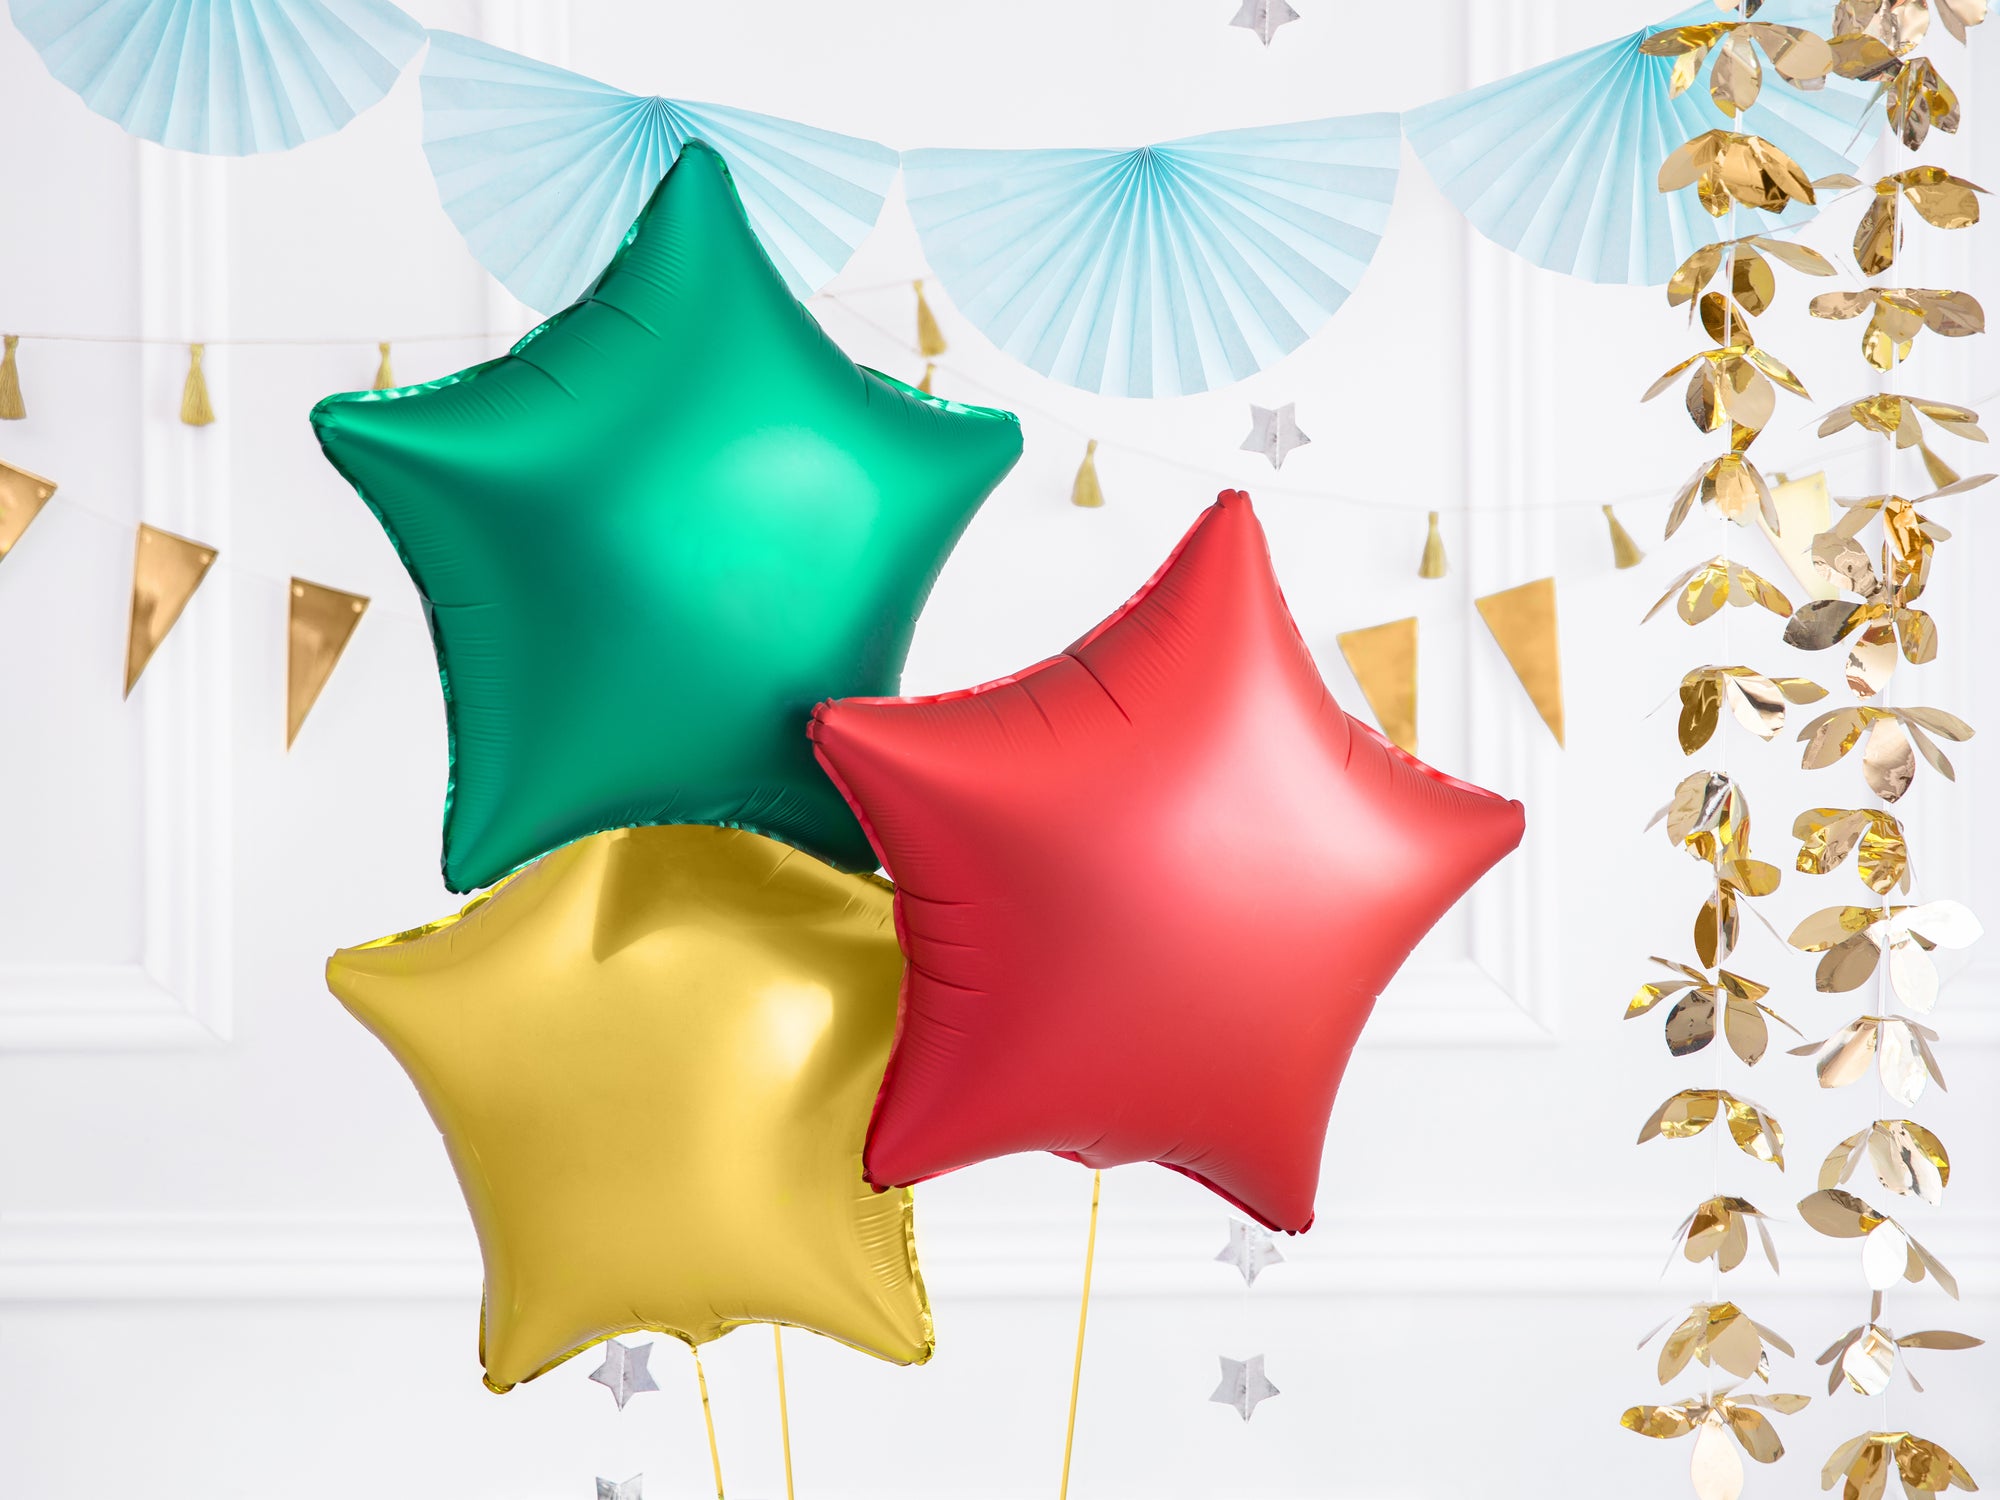 Red Star Foil Balloon 19in | The Party Darling